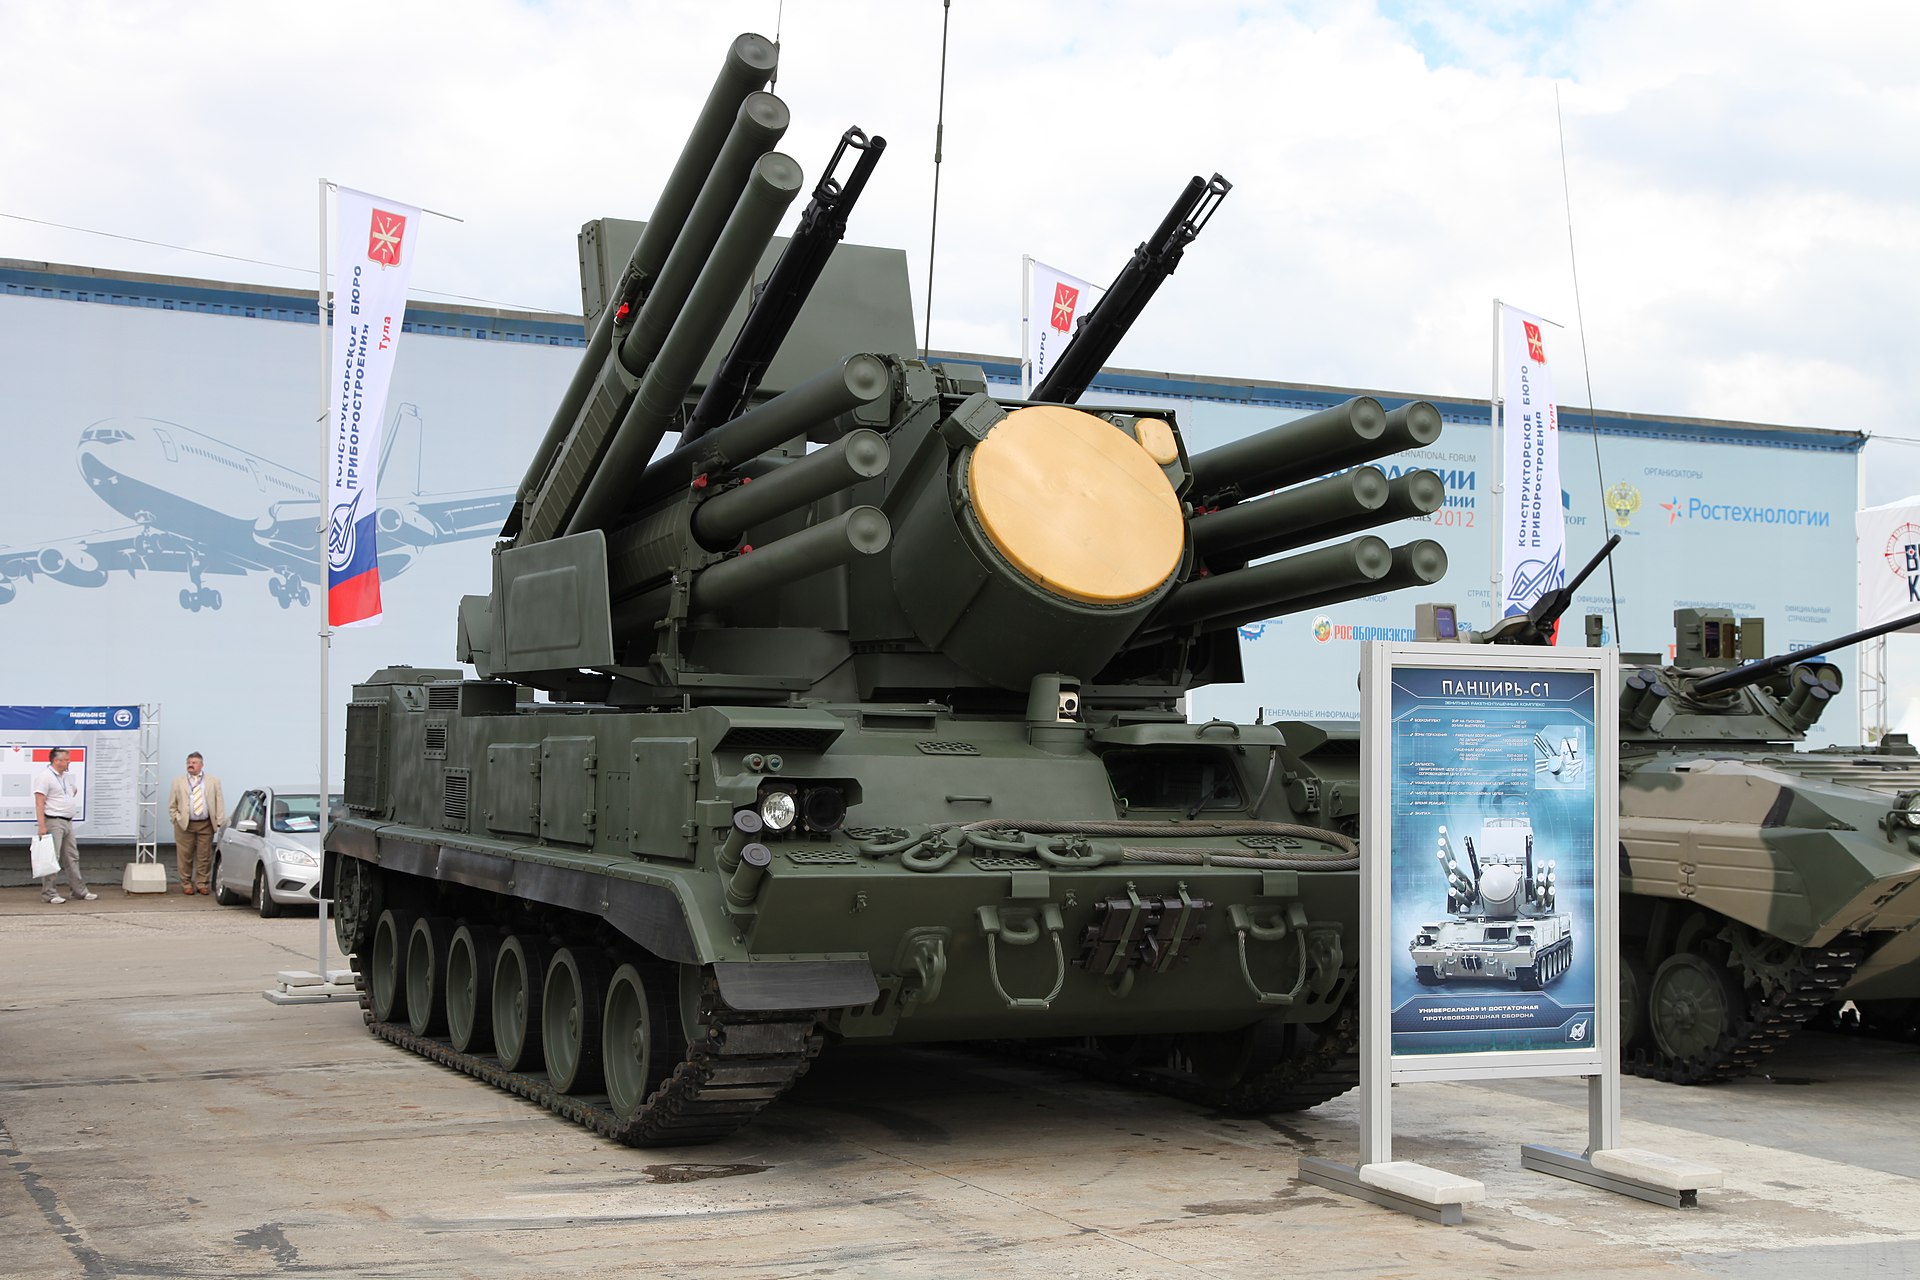 Russia Talks With India About Pantsir-S1, Tor-M2KM Air Defense Systems, IFVs, And Drones